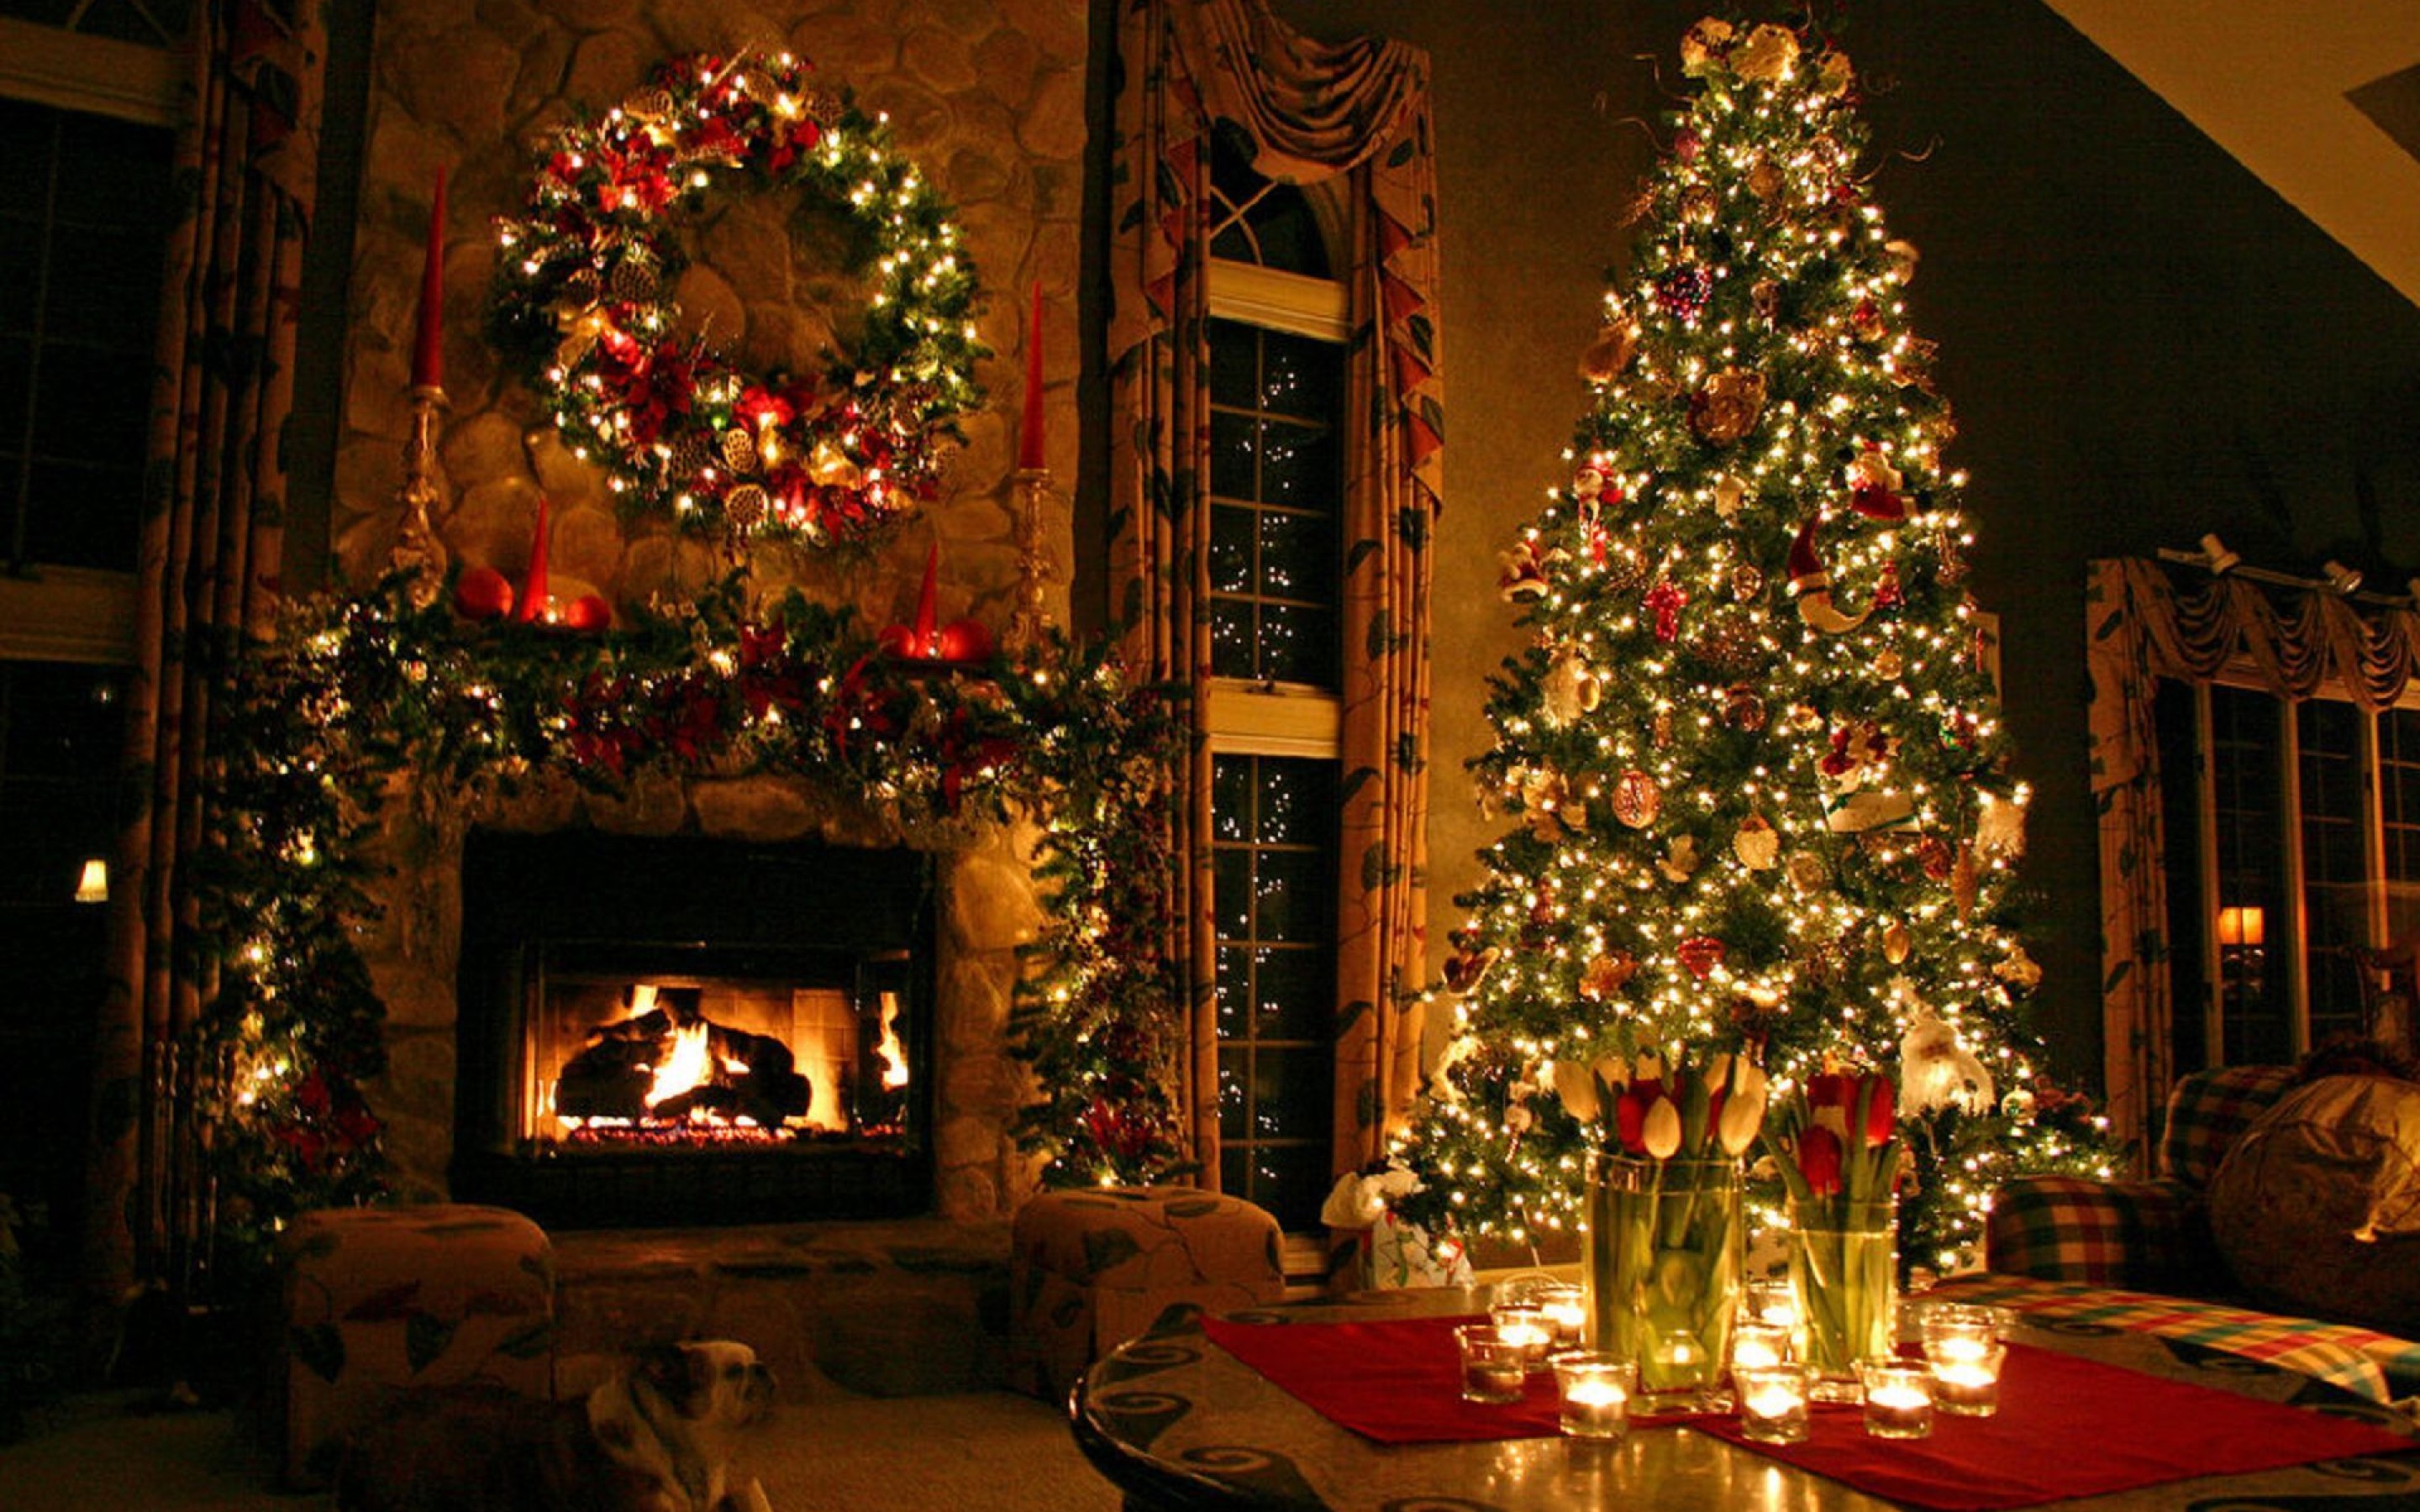 Merry Christmas hd Wallpapers, Images Free Download